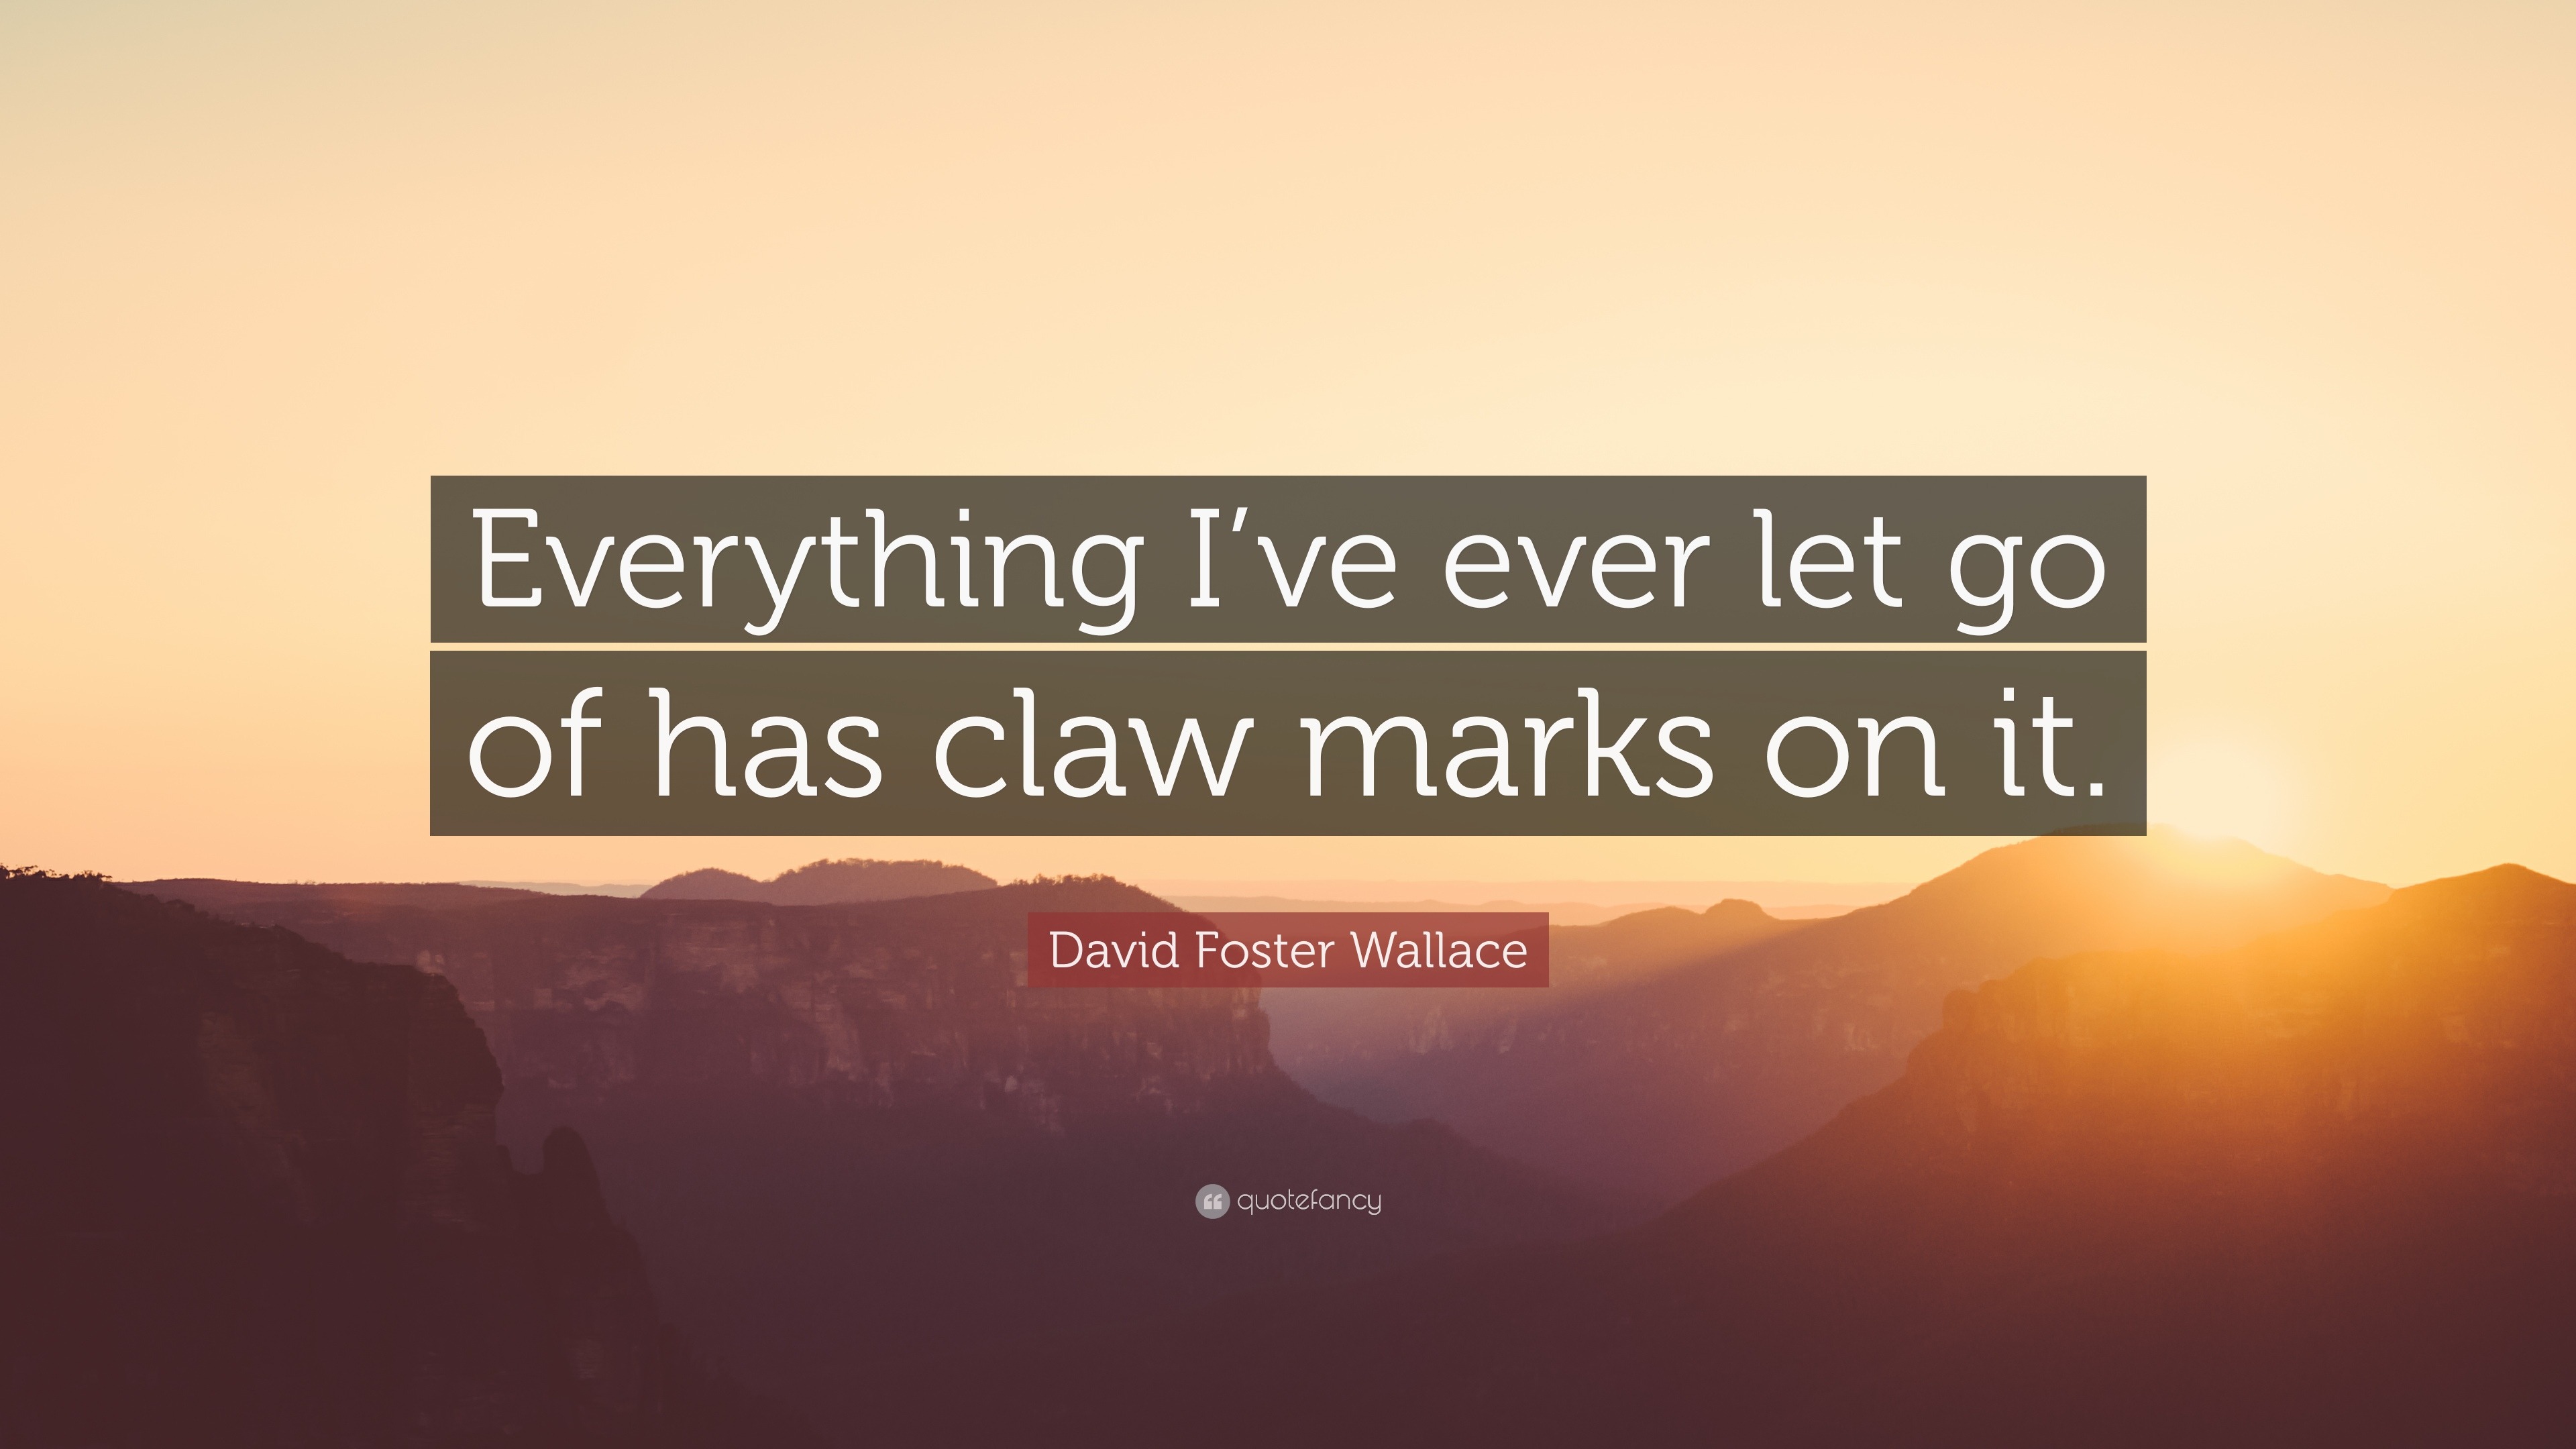 David Foster Wallace Quotes (100 wallpapers) - Quotefancy